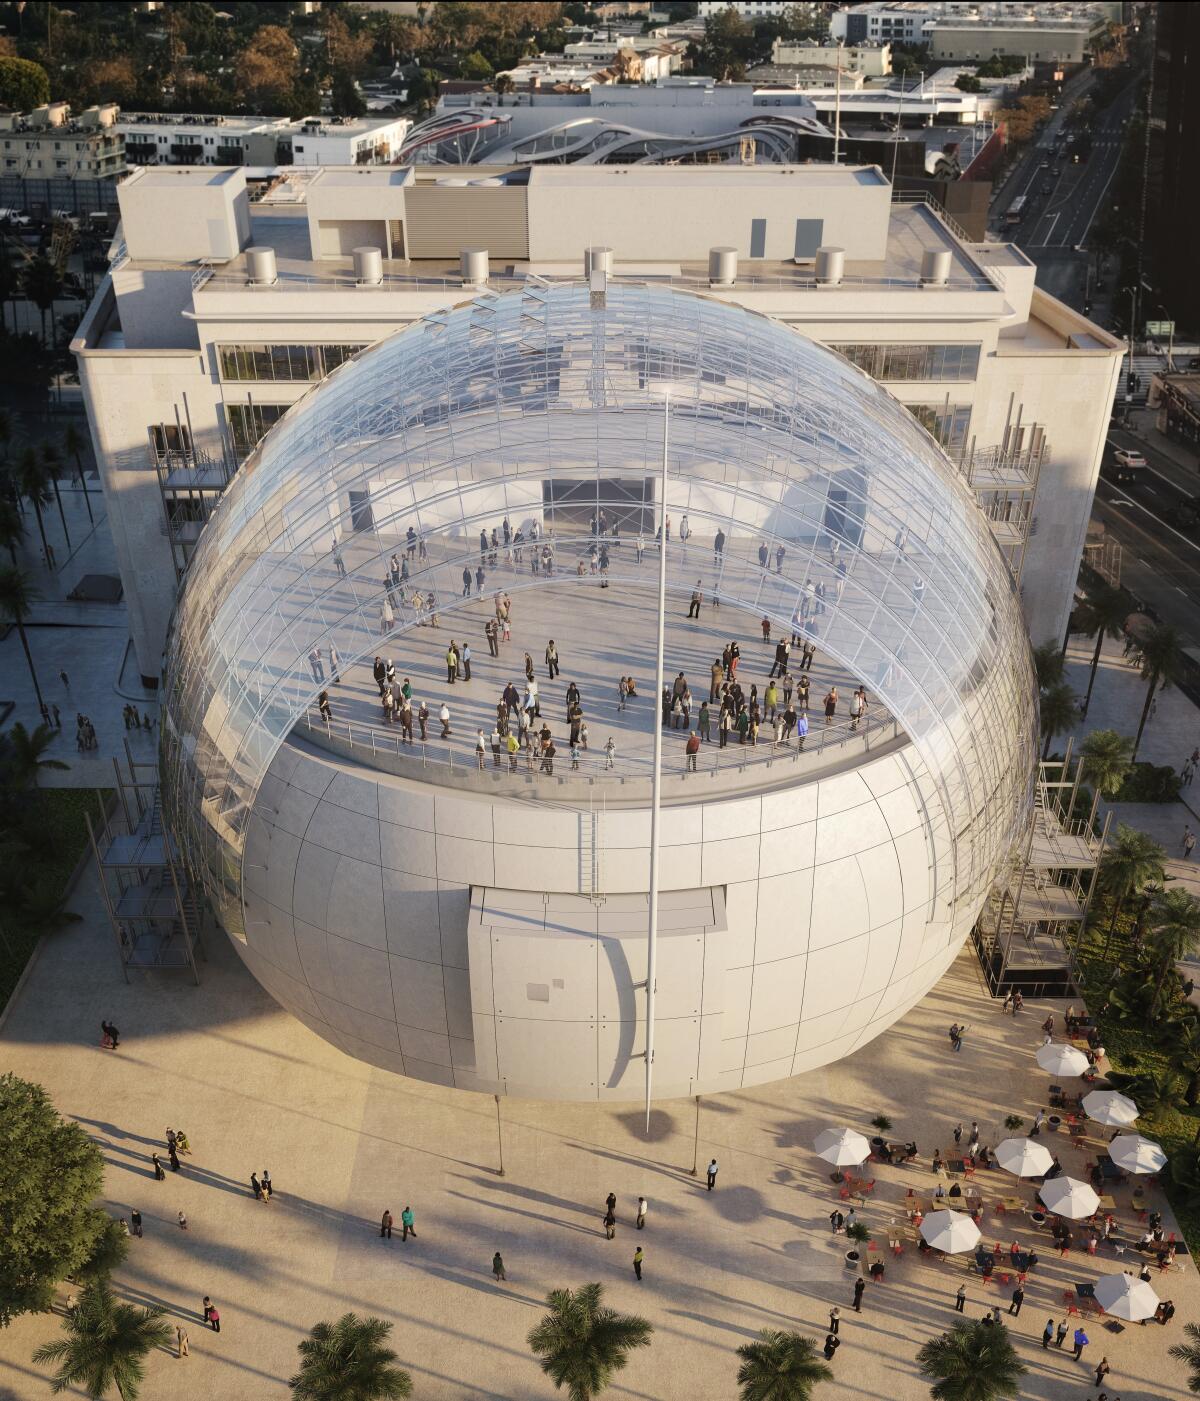 An aerial view rendering of the Academy Museum's David Geffen Theatre, with domed terrace on top.